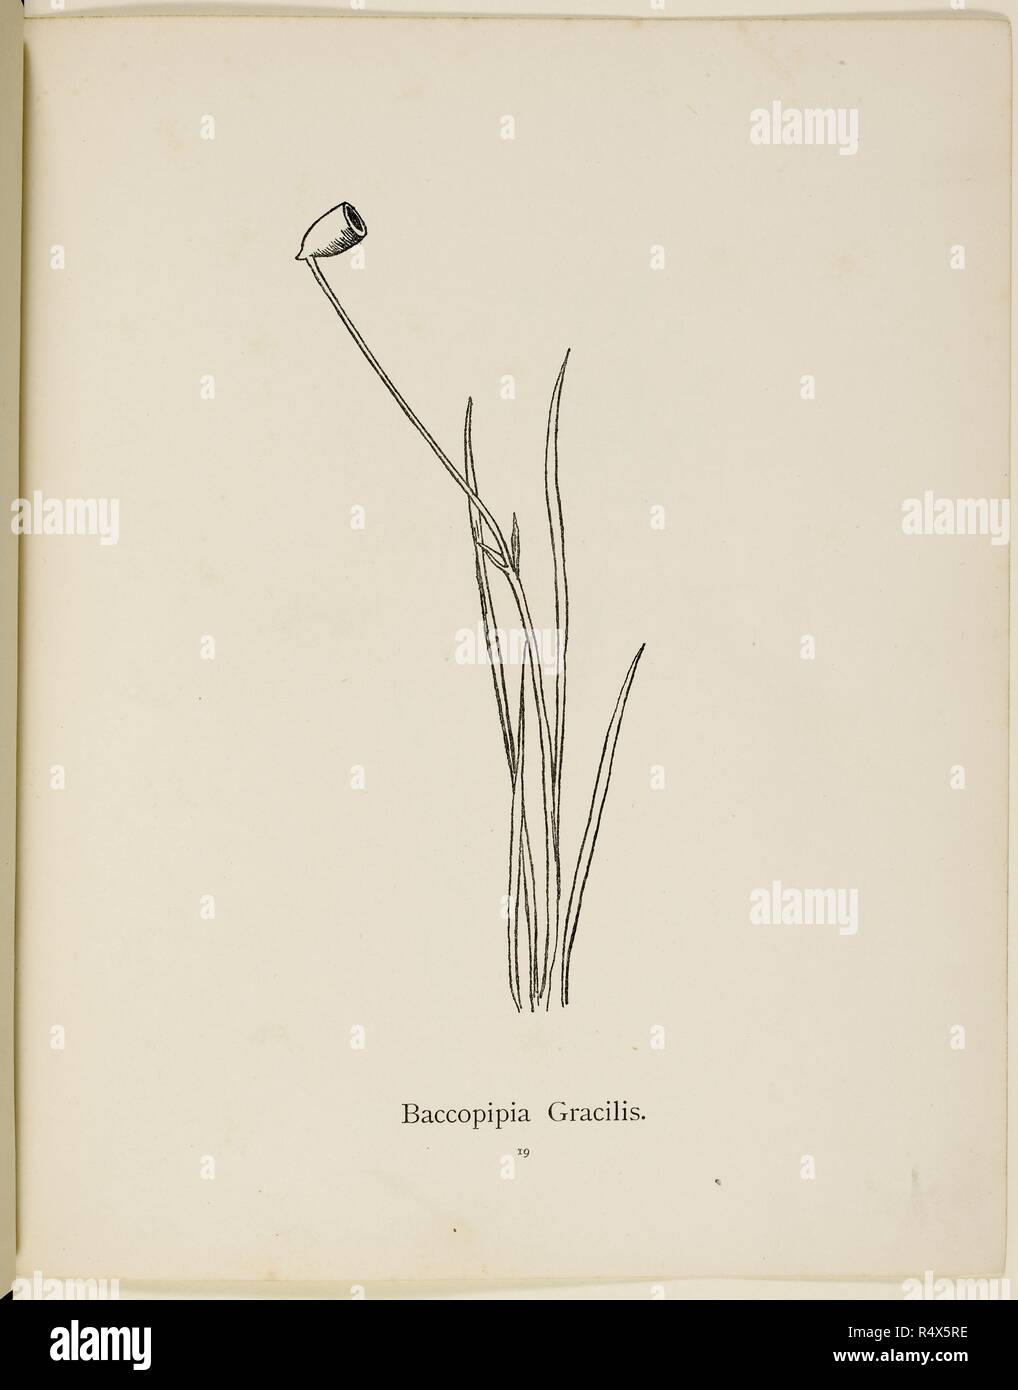 Fictional plant: 'Baccopipia Gracilis'  Illustration from Nonsense Botany by Edward Lear, published in 1889. . Nonsense Botany, and Nonsense Alphabets, Fifth edition. Frederick Warne & Co.: London & New York, 1889. Source: Cup.400.a.42 19. Language: English. Stock Photo